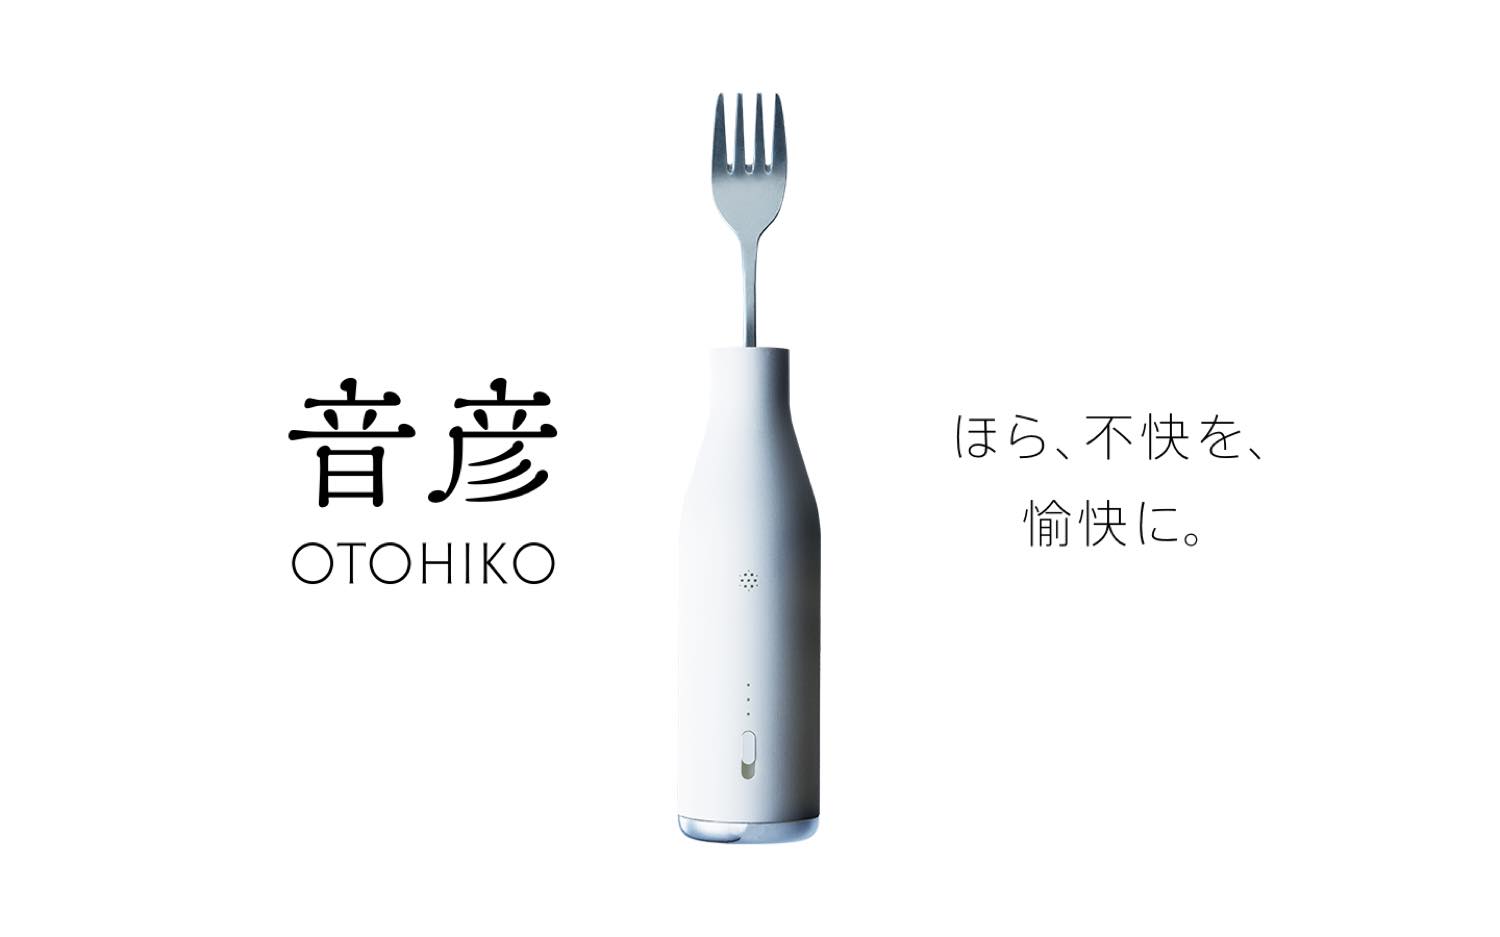 Nissin Introduces Revolutionary “OTOHIKO” Noise-Cancelling Fork to End “Noodle Harassment”!